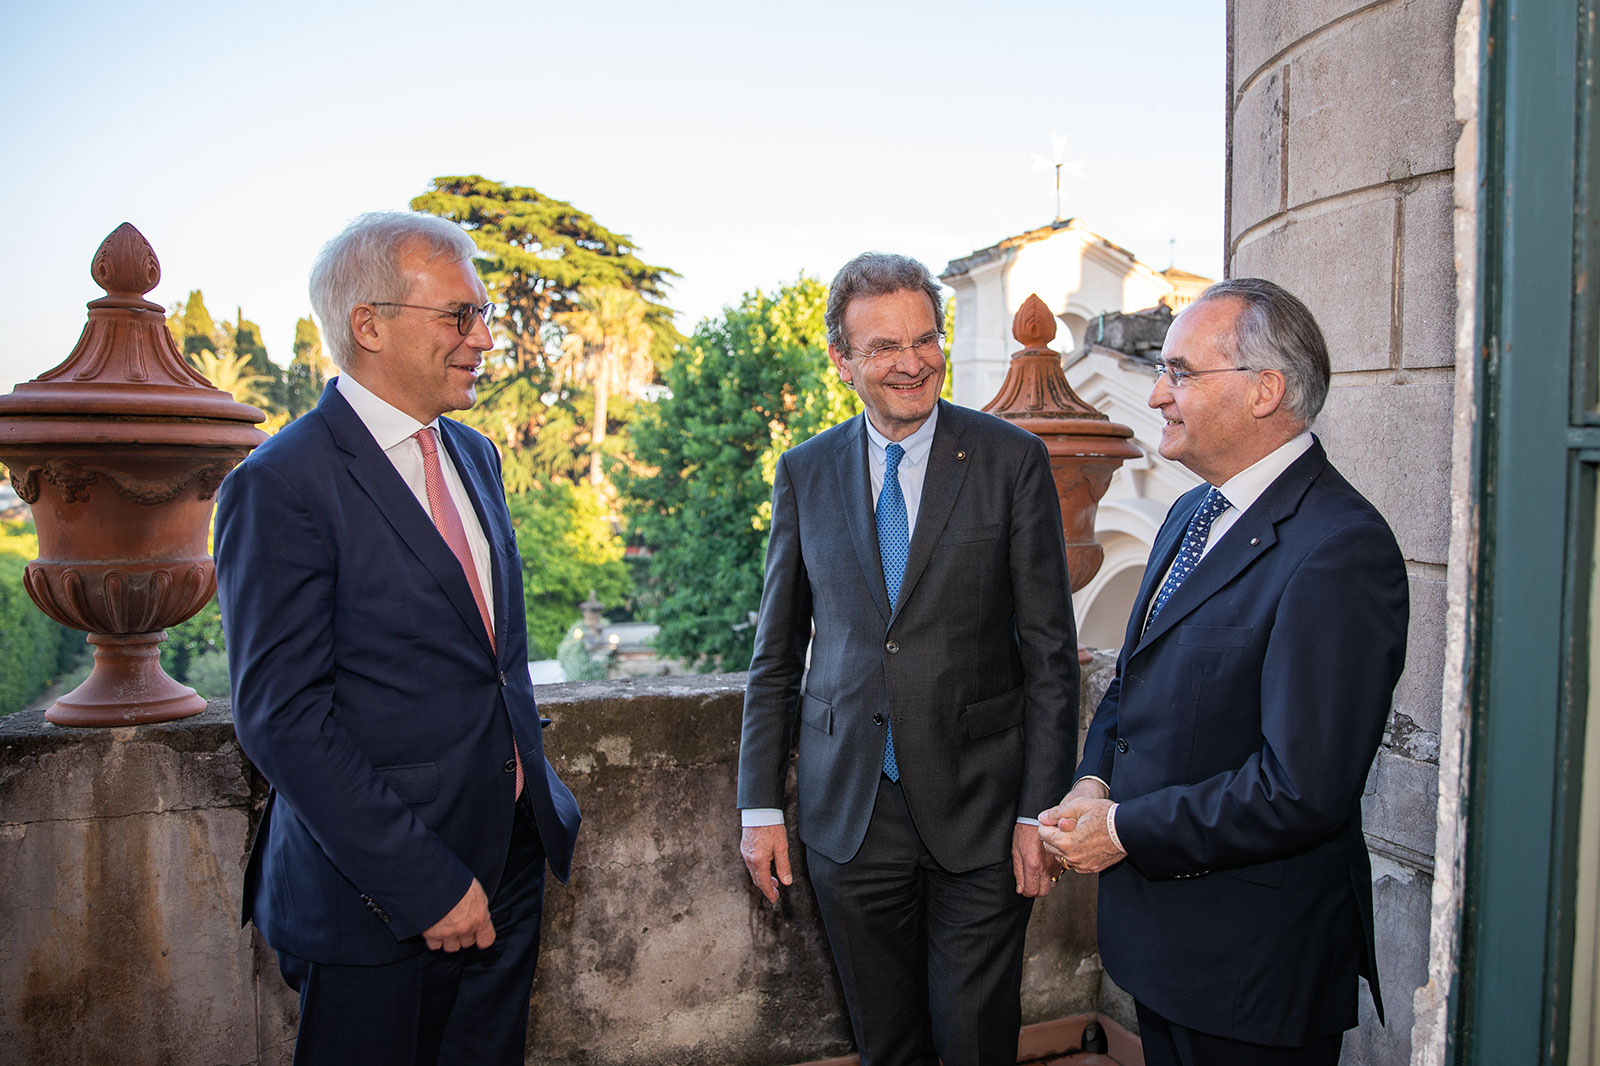 Meeting of the Russian Deputy Minister of Foreign Affairs, Alexander Grushko, with the Grand Chancellor of the Sovereign Order of Malta, Albrecht Boeselager